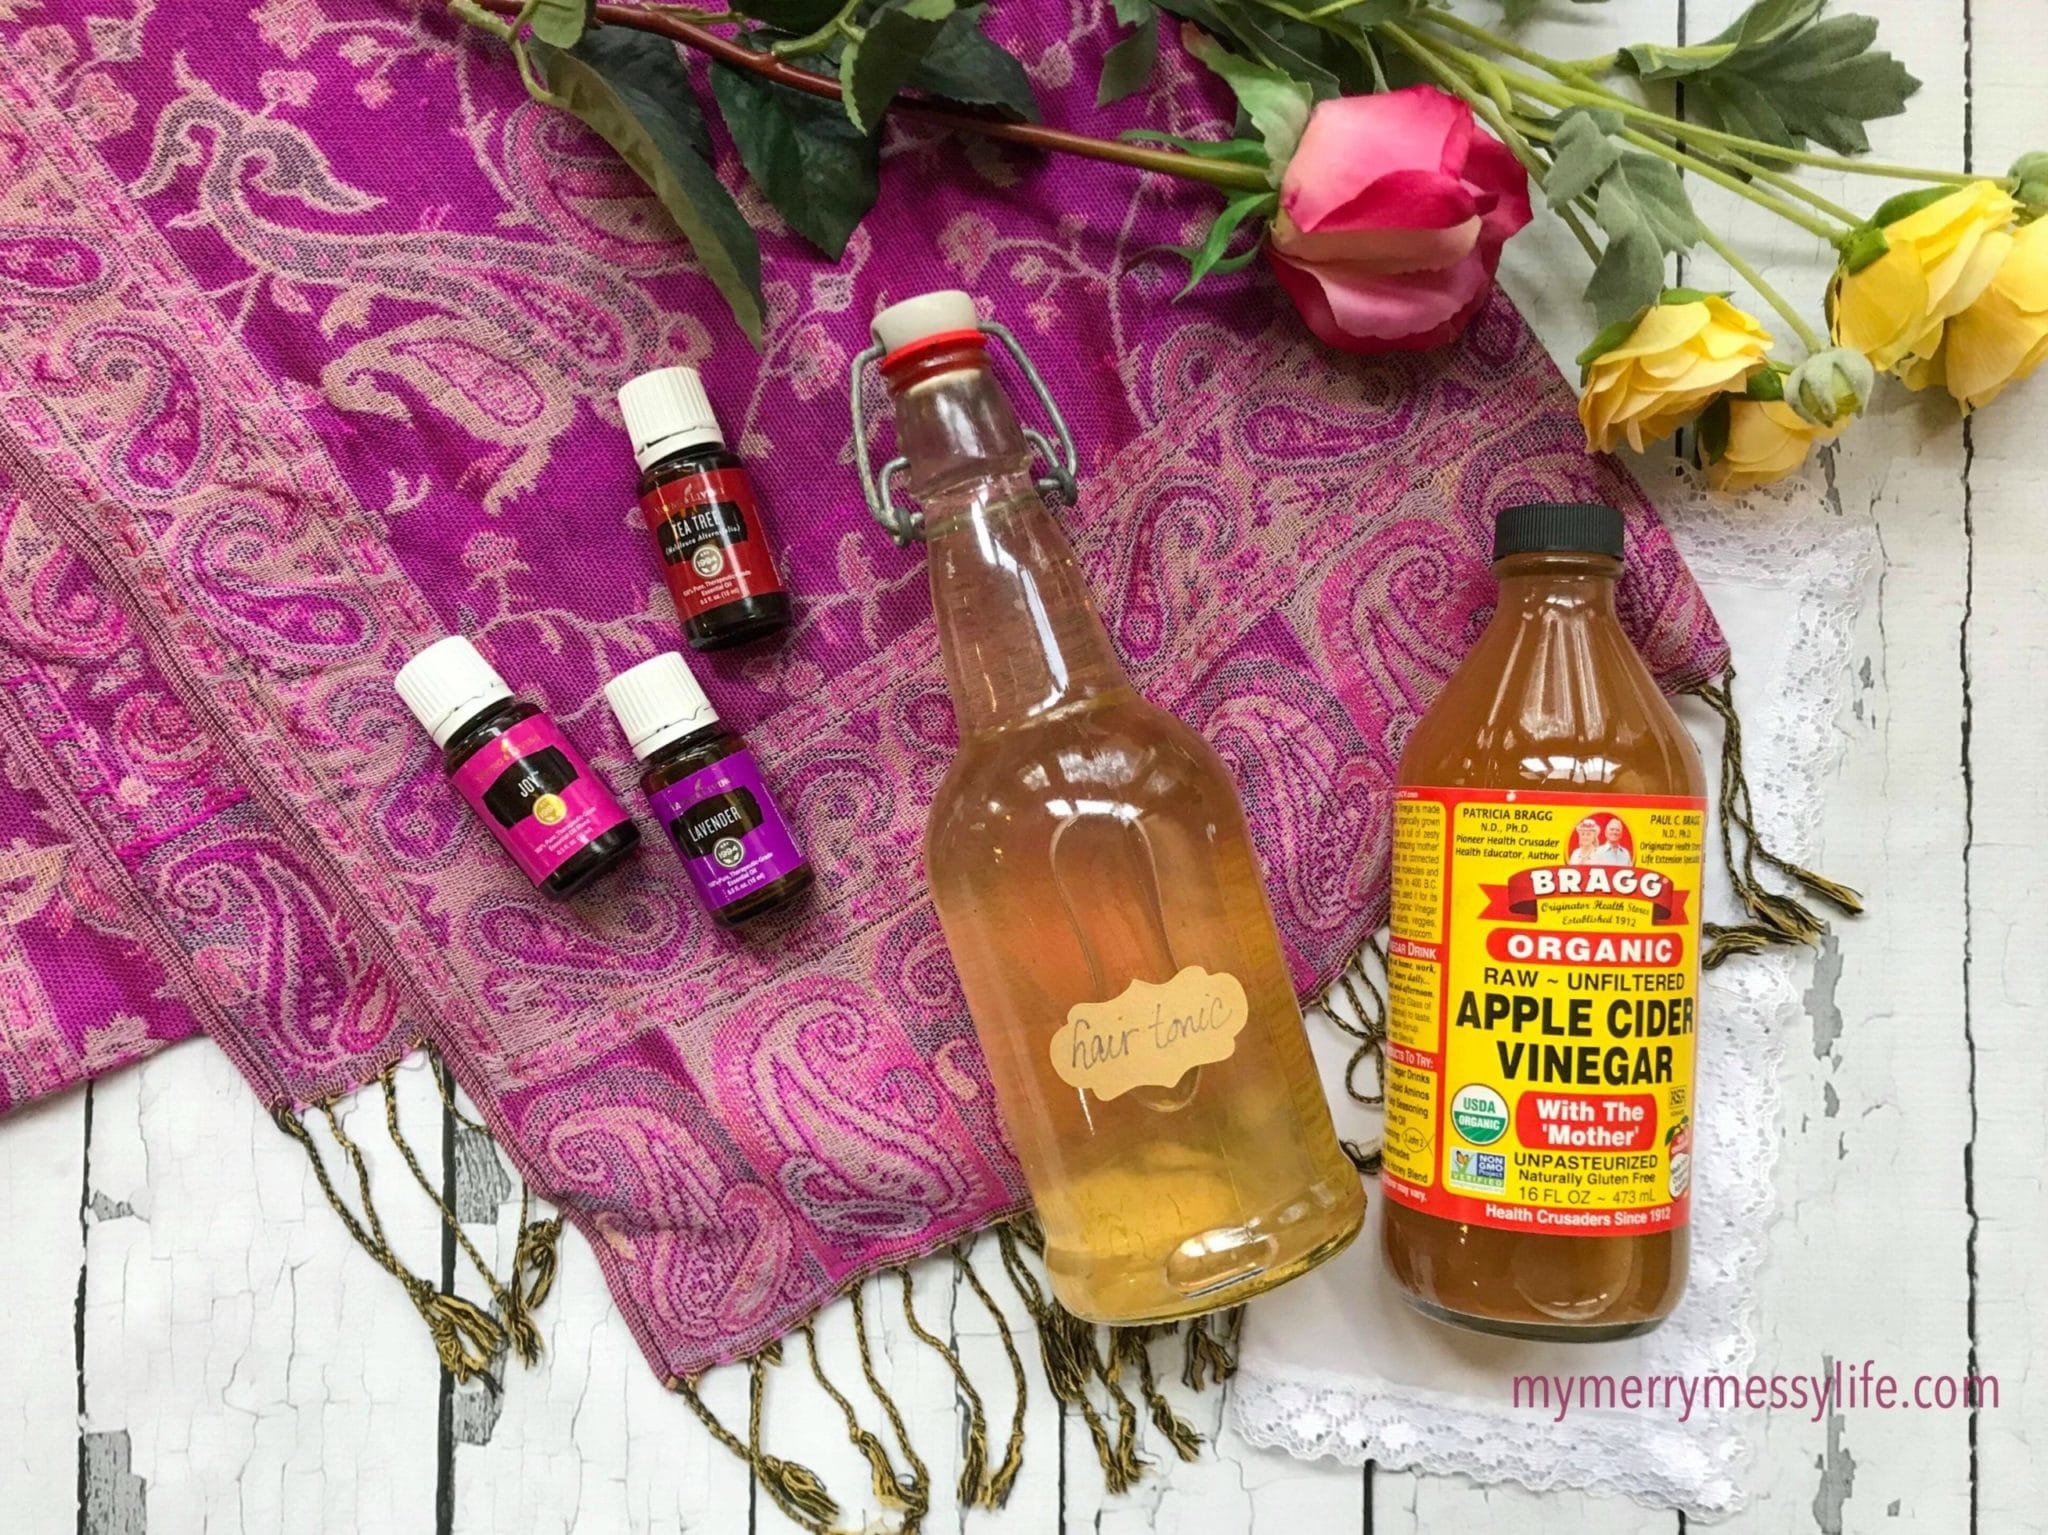 DIY Natural Clarifying Shampoo and Hair Tonic Recipe with Apple Cider Vinegar and Essential Oils to gently remove product buildup, dirt and grime from the hair